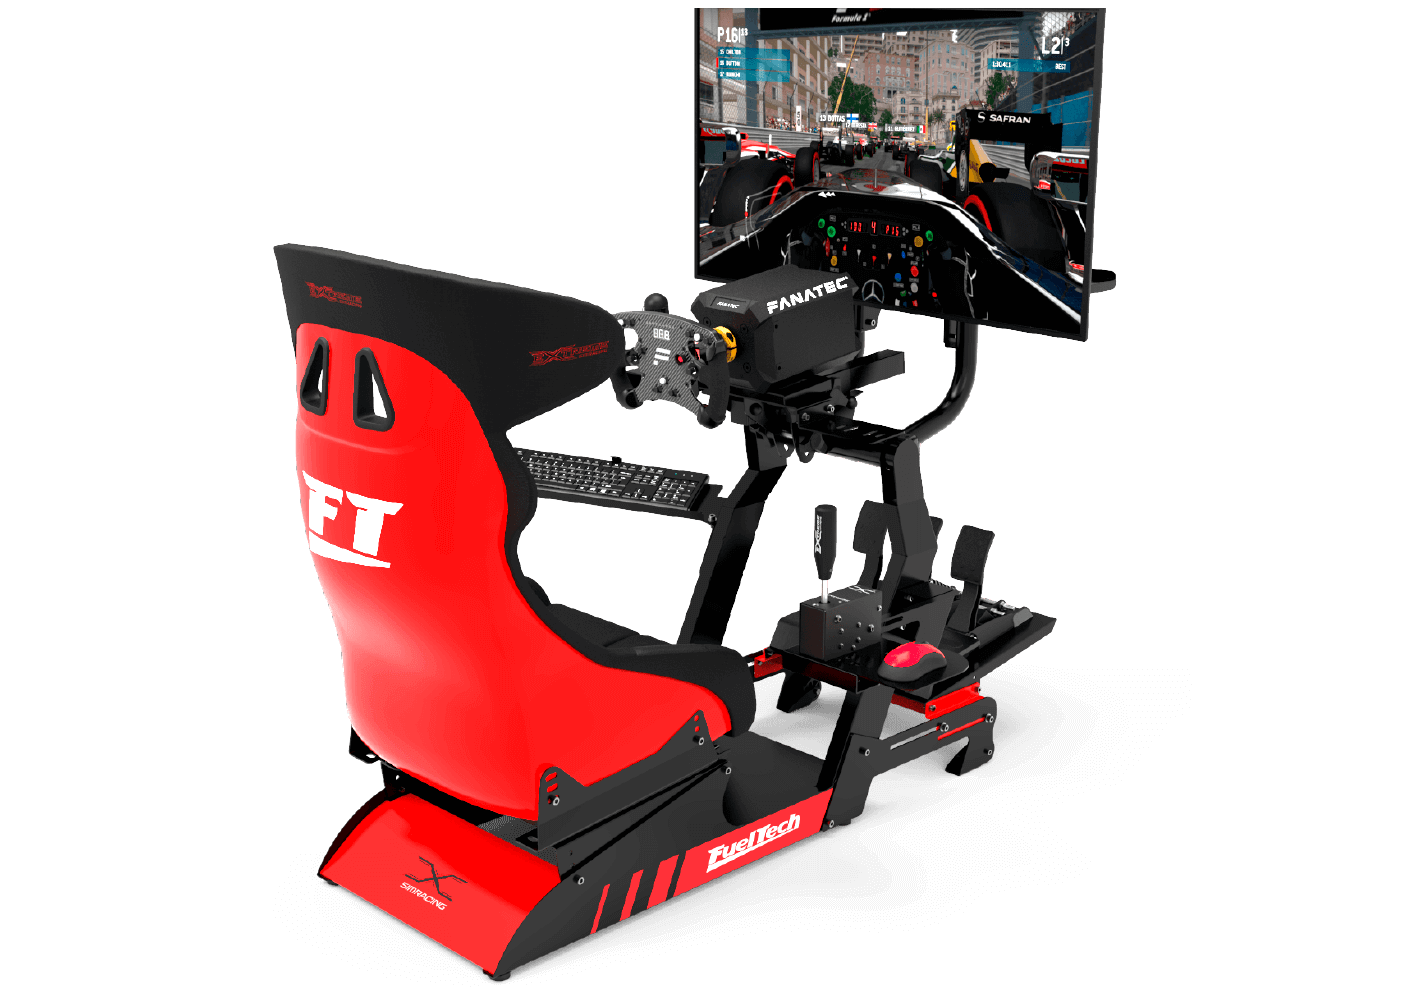 Cockpit P1 3.0 Full Accessories - FuelTech Edition